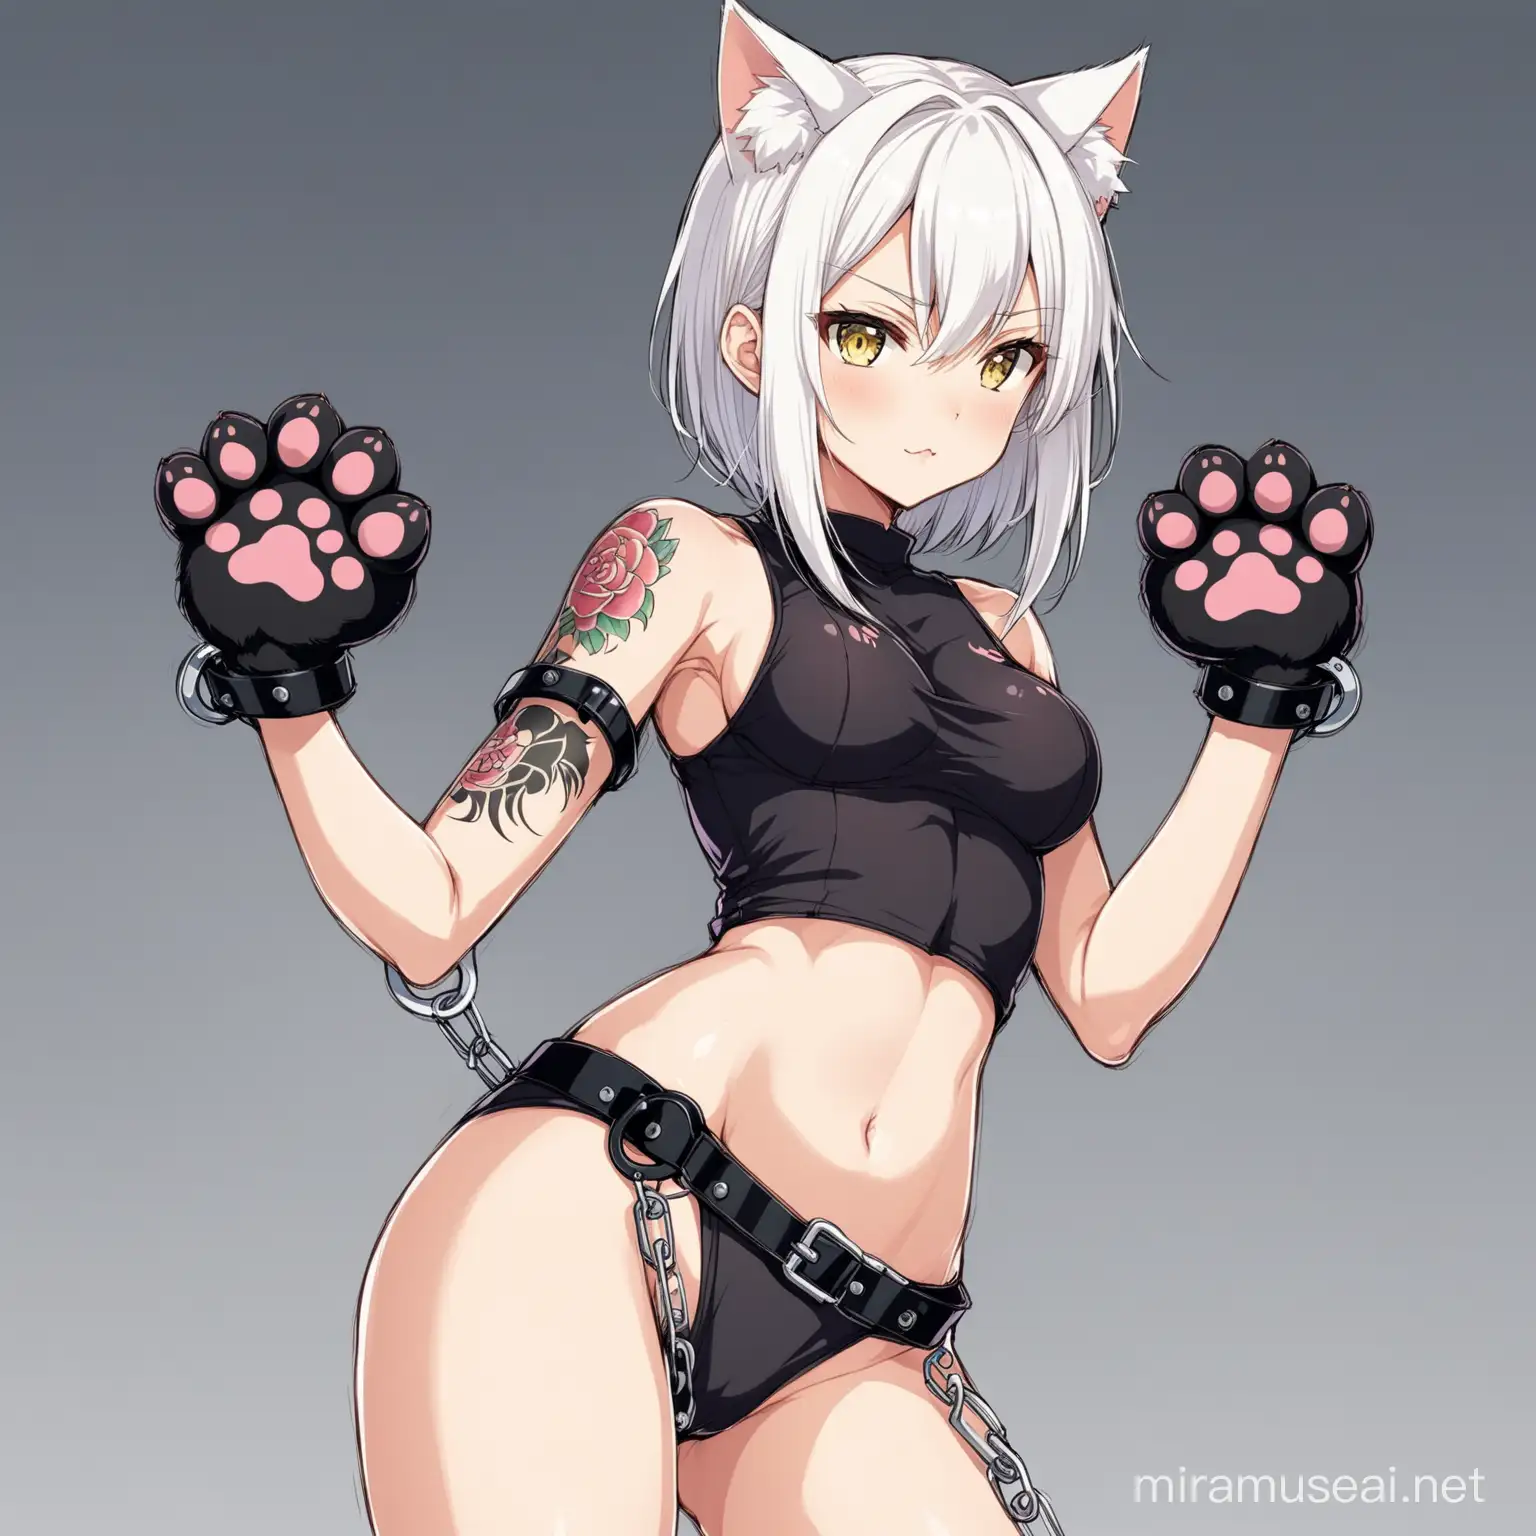 Anime Catgirl with White Hair and Cat Paw Tattoo in Handcuffs